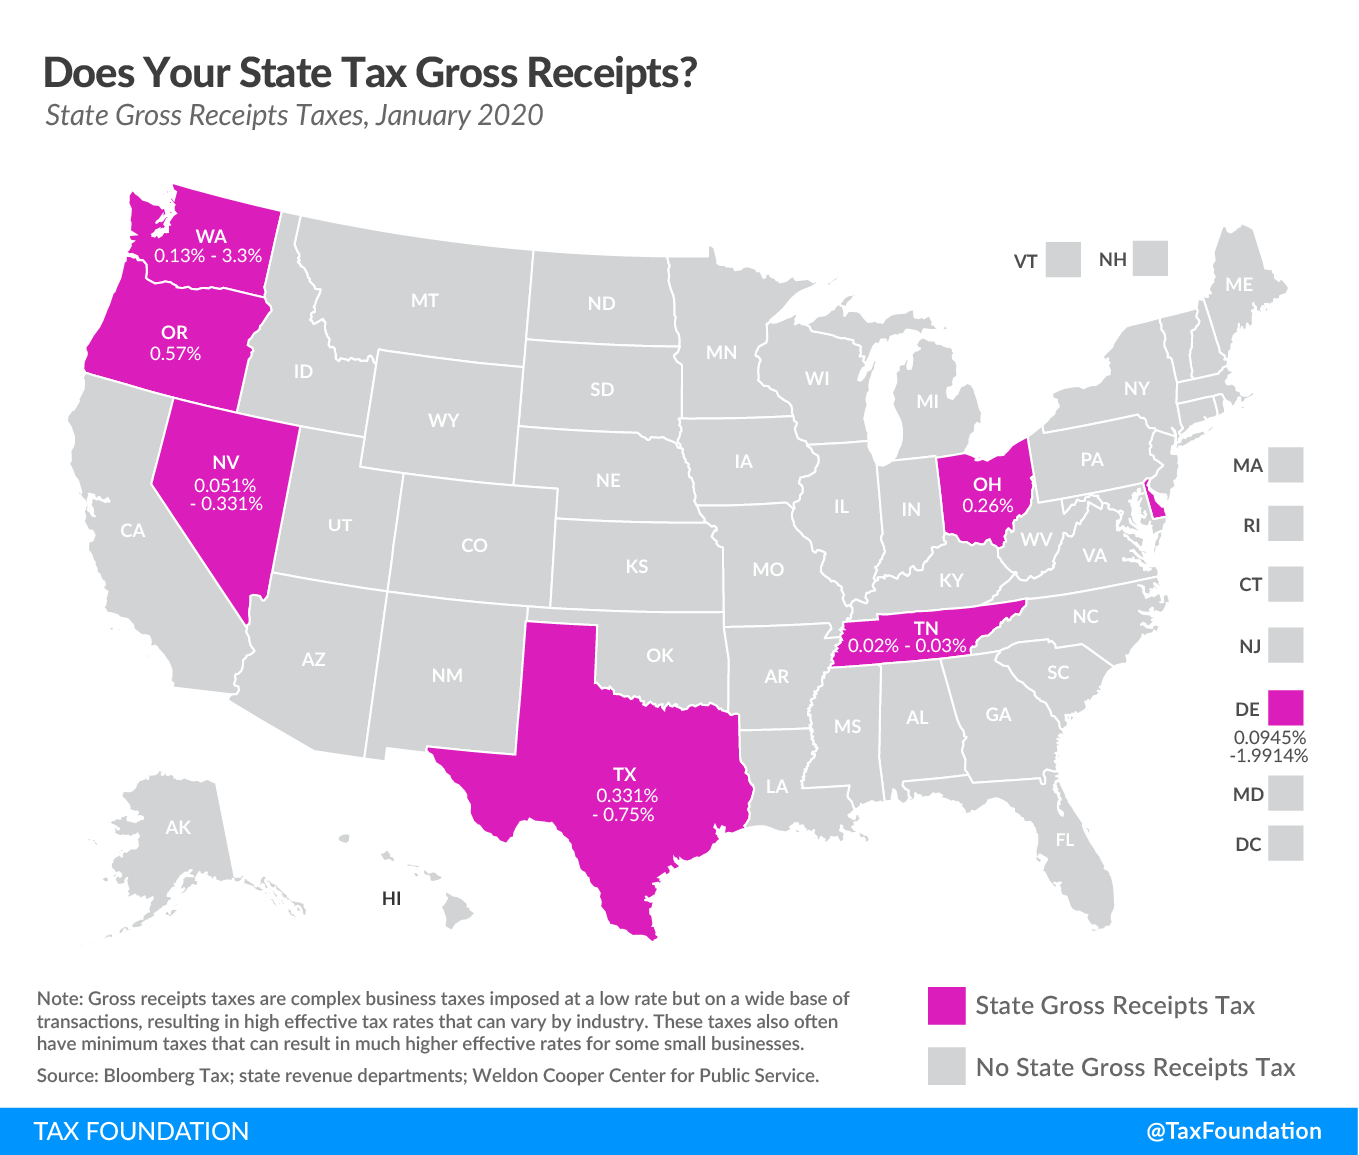 Which states have a gross receipts tax? State gross receipts tax, state gross receipts tax, Washington state gross receipts tax, Washington gross receipts tax, Oregon gross receipts tax, Nevada gross receipts tax, Texas gross receipts tax, Tennessee gross receipts tax, Ohio gross receipts tax, Delaware gross receipts tax